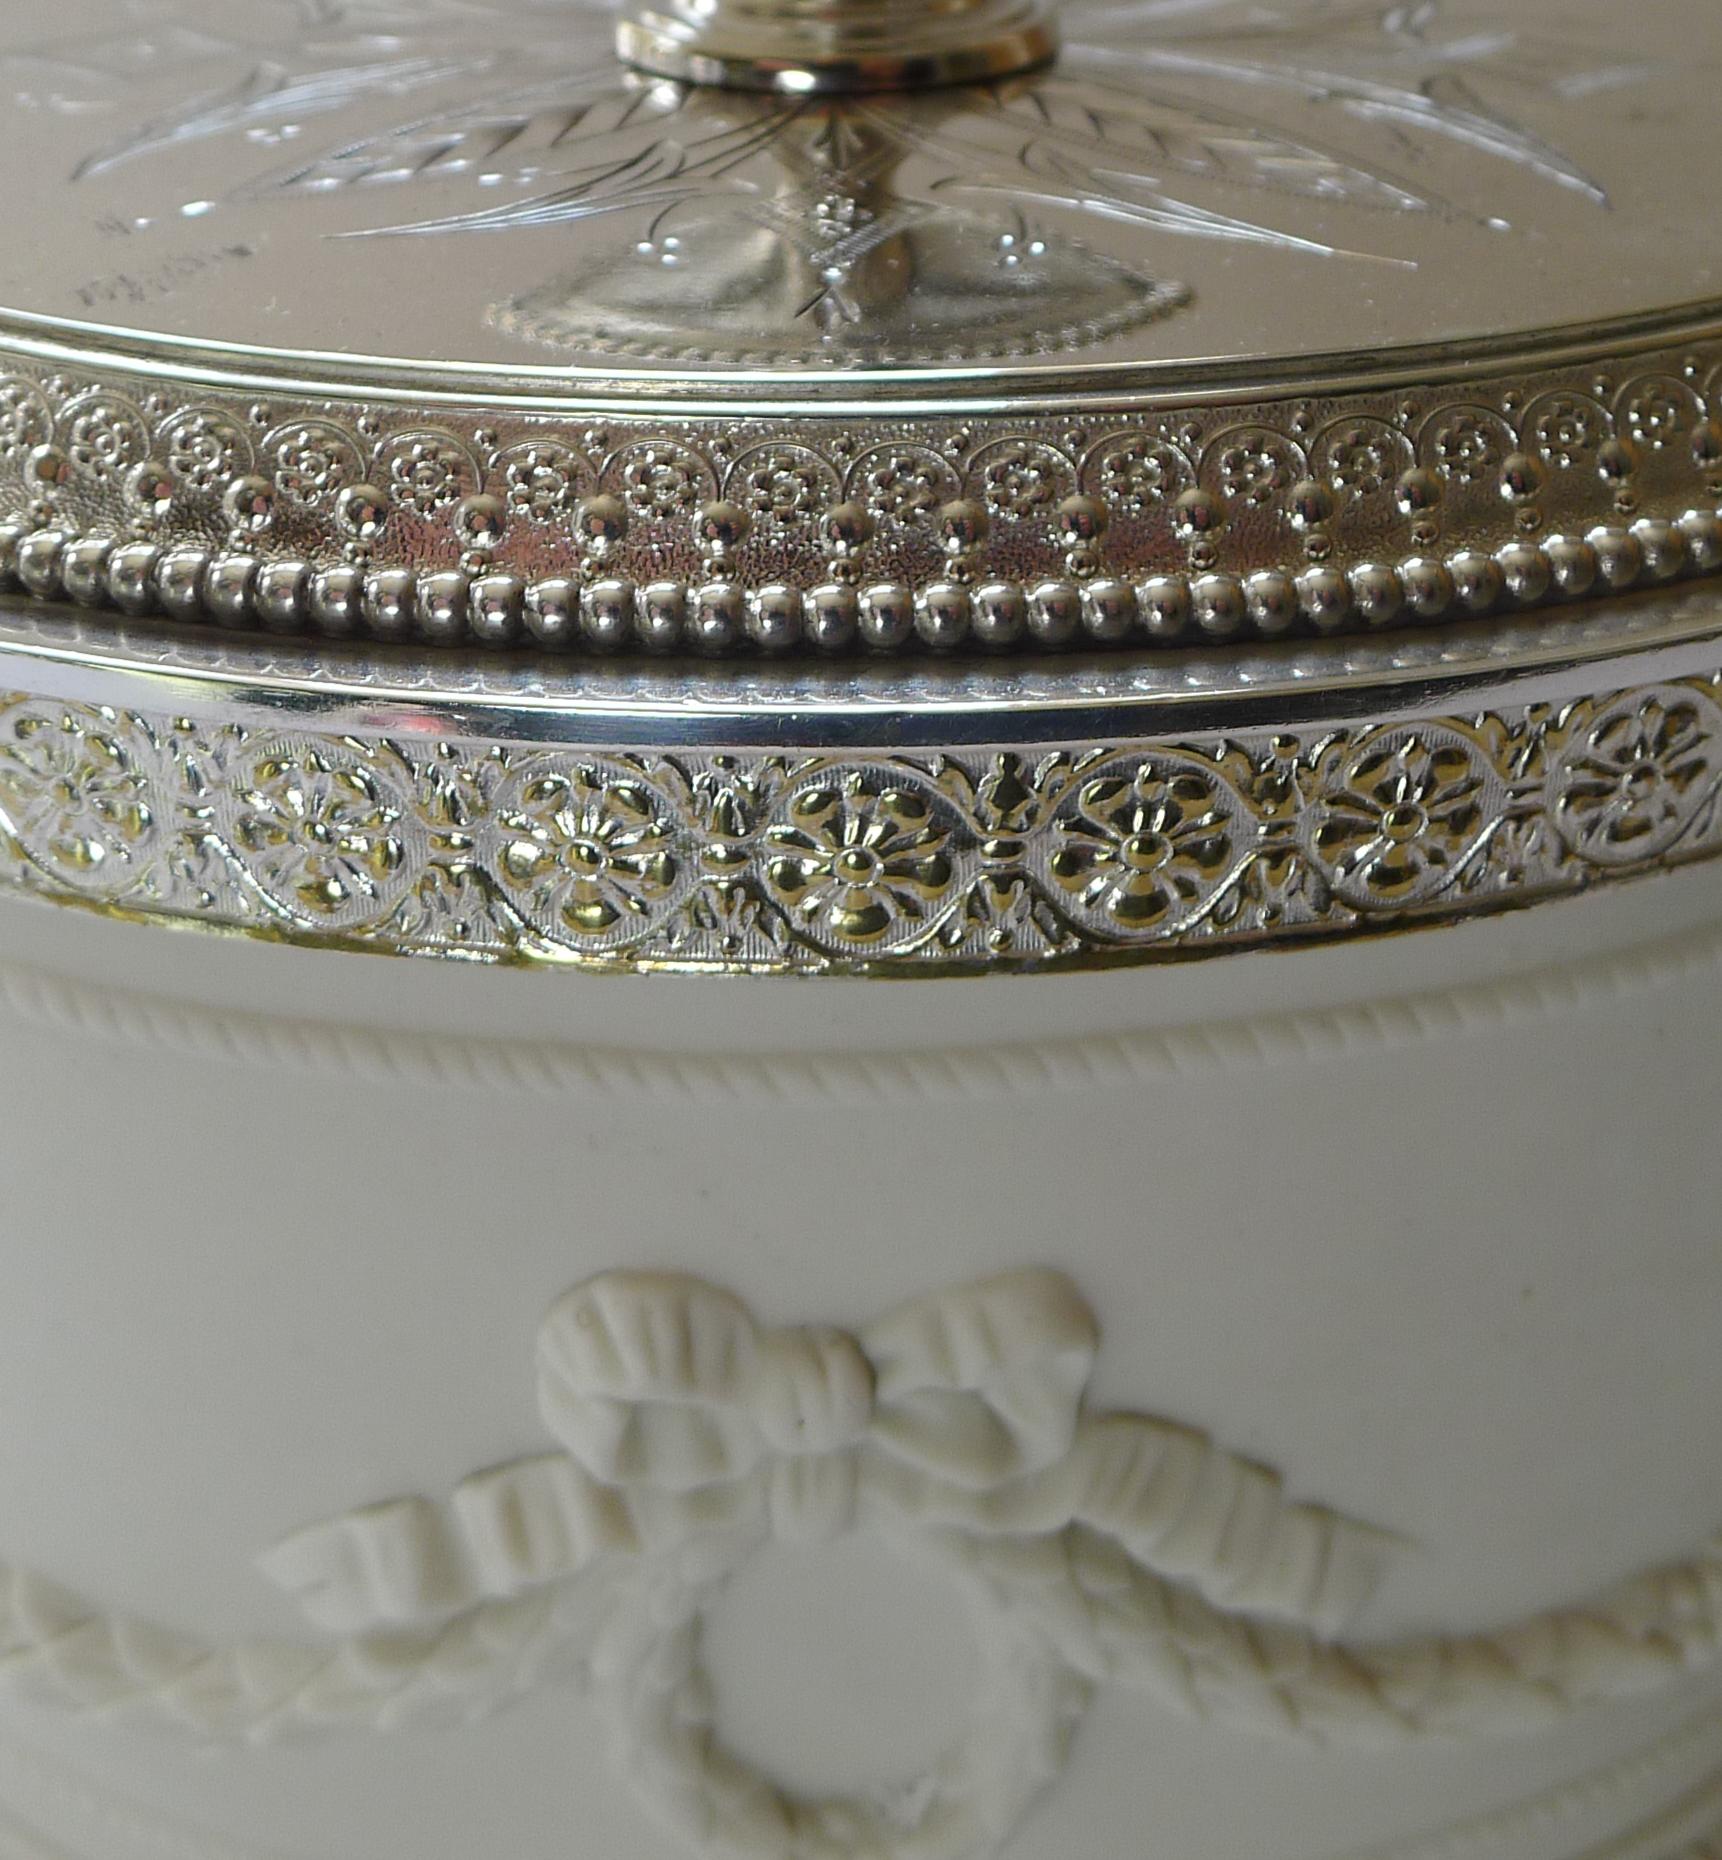 Late Victorian Rare Antique English Parian & Silver Plate Biscuit Box, c.1880